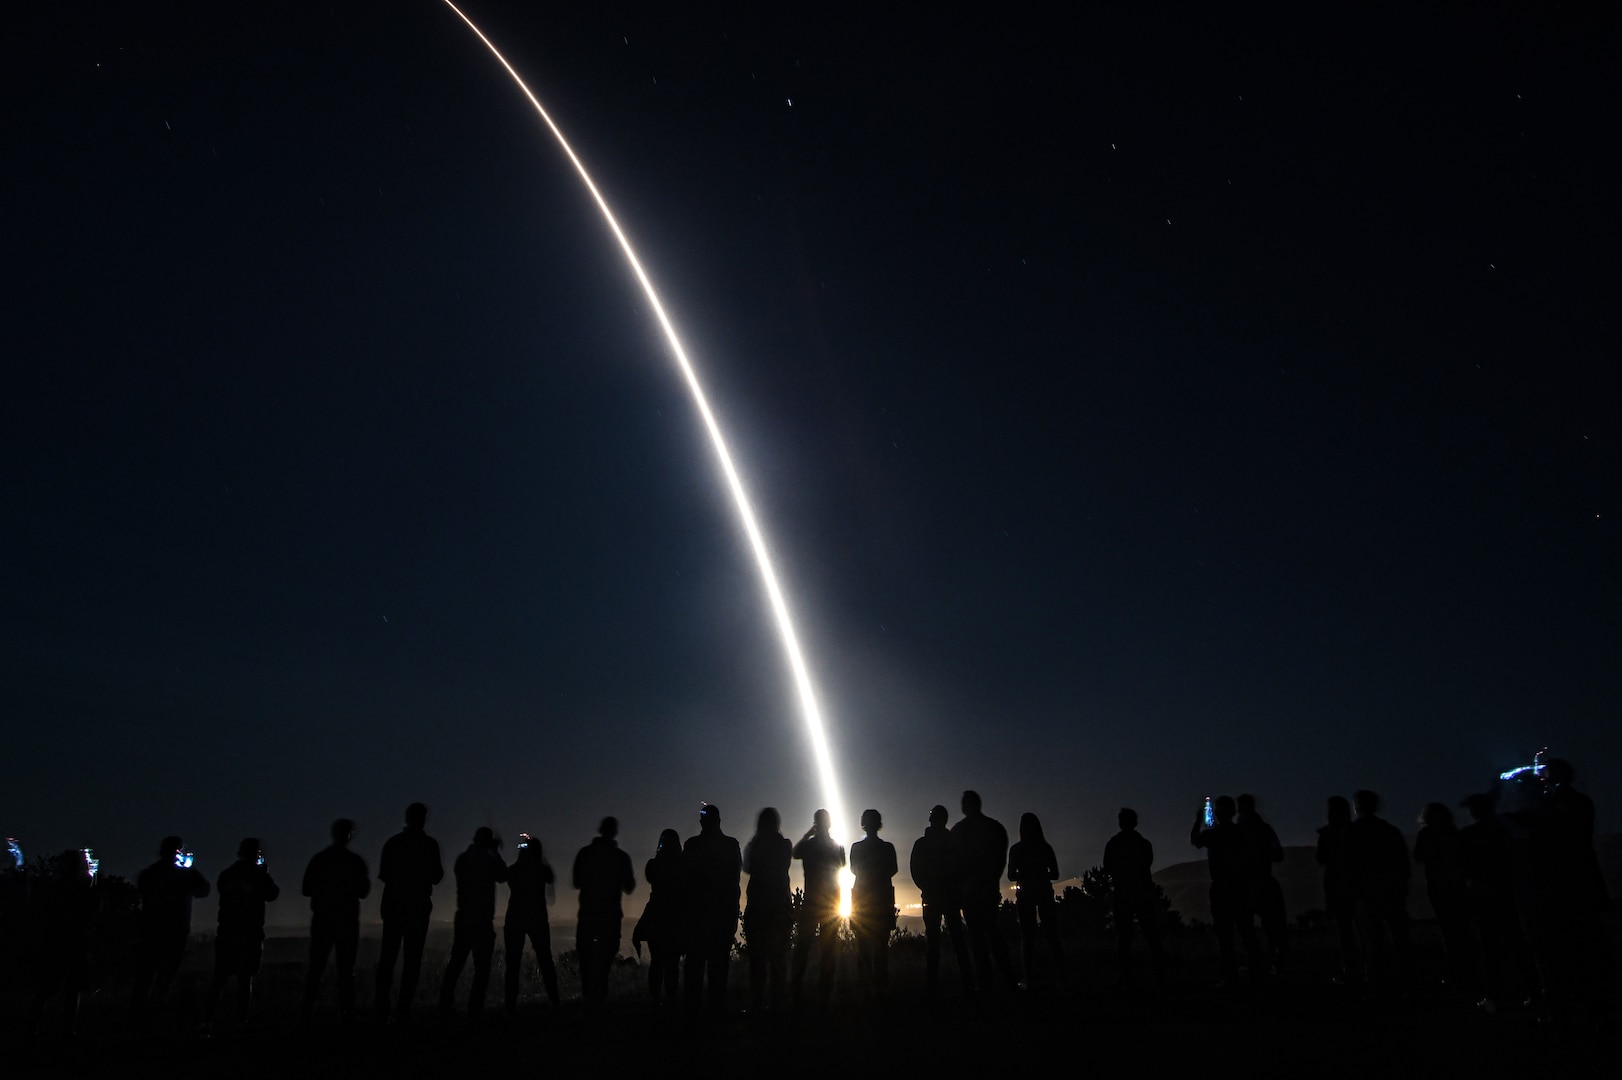 An Air Force Global Strike Command unarmed Minuteman III Intercontinental Ballistic Missile launches during an operational
test at 1:13 A.M. PDT, Sept. 7 at Vandenberg Space Force Base, Calif. ICBM test launches demonstrate that the U.S. ICBM fleet is relevant, essential and key to leveraging dominance in an era of strategic competition. (U.S. Air Force photo by Airman 1st Class Ryan Quijas)